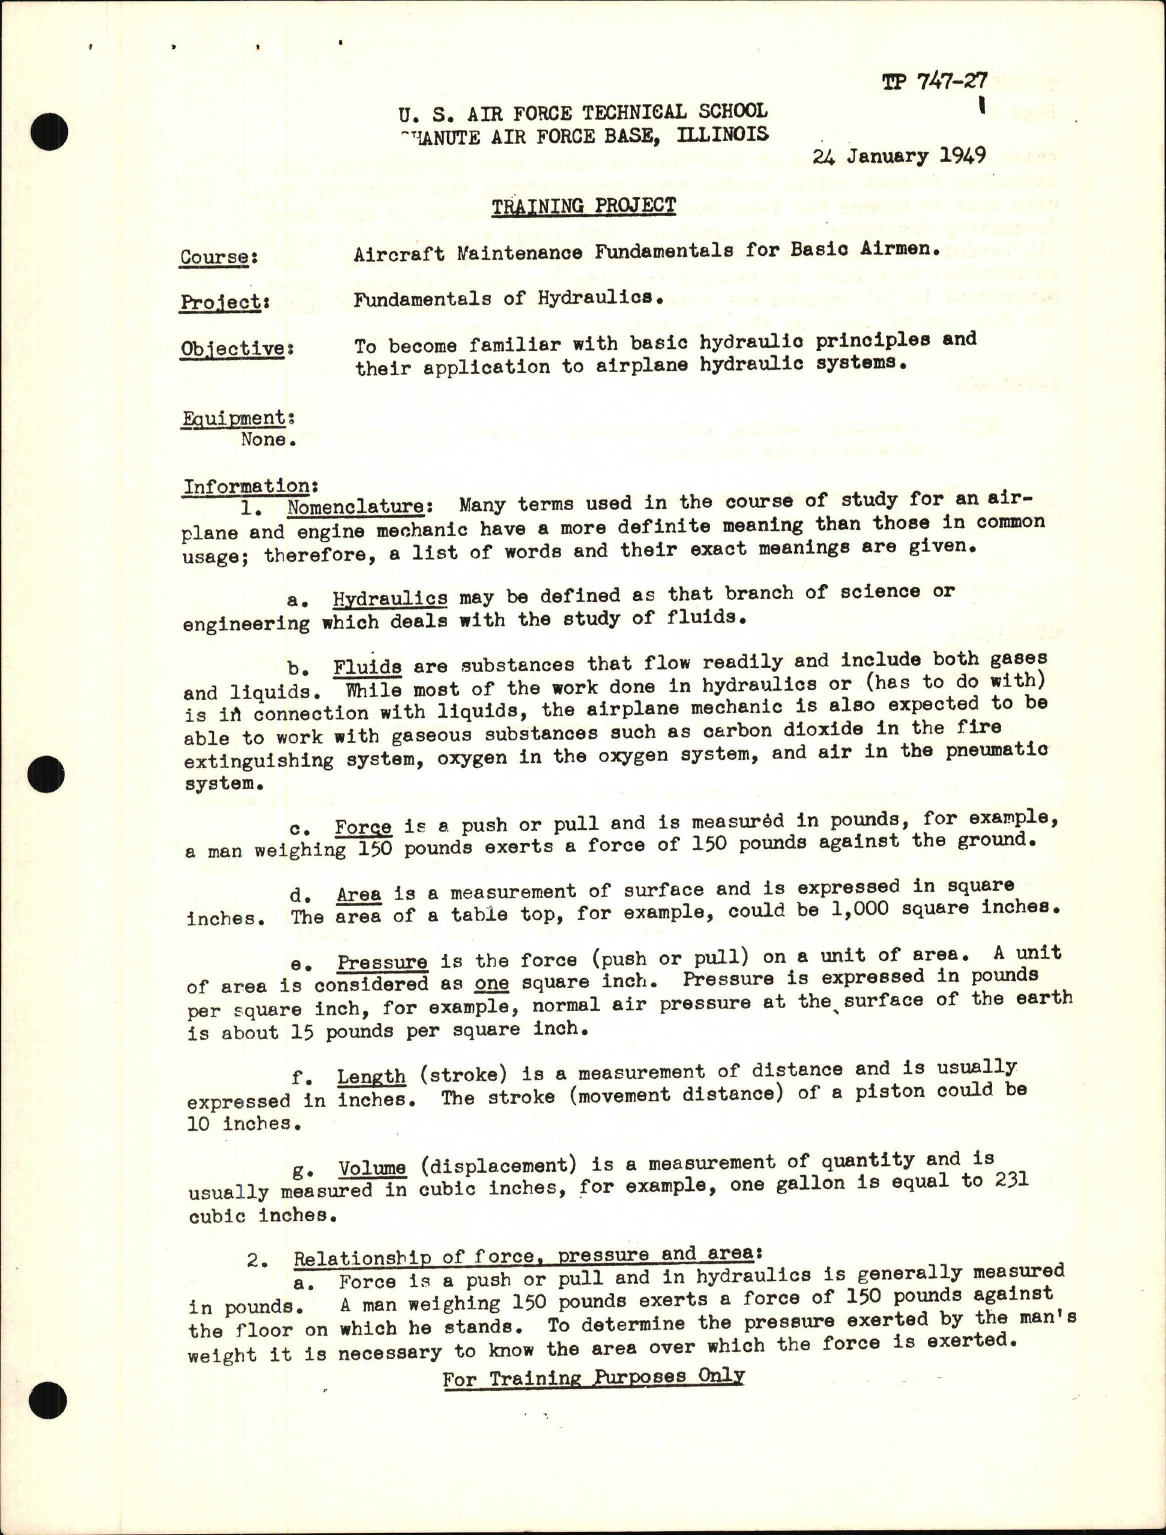 Sample page 1 from AirCorps Library document: Training Project, Fundamentals of Hydraulics